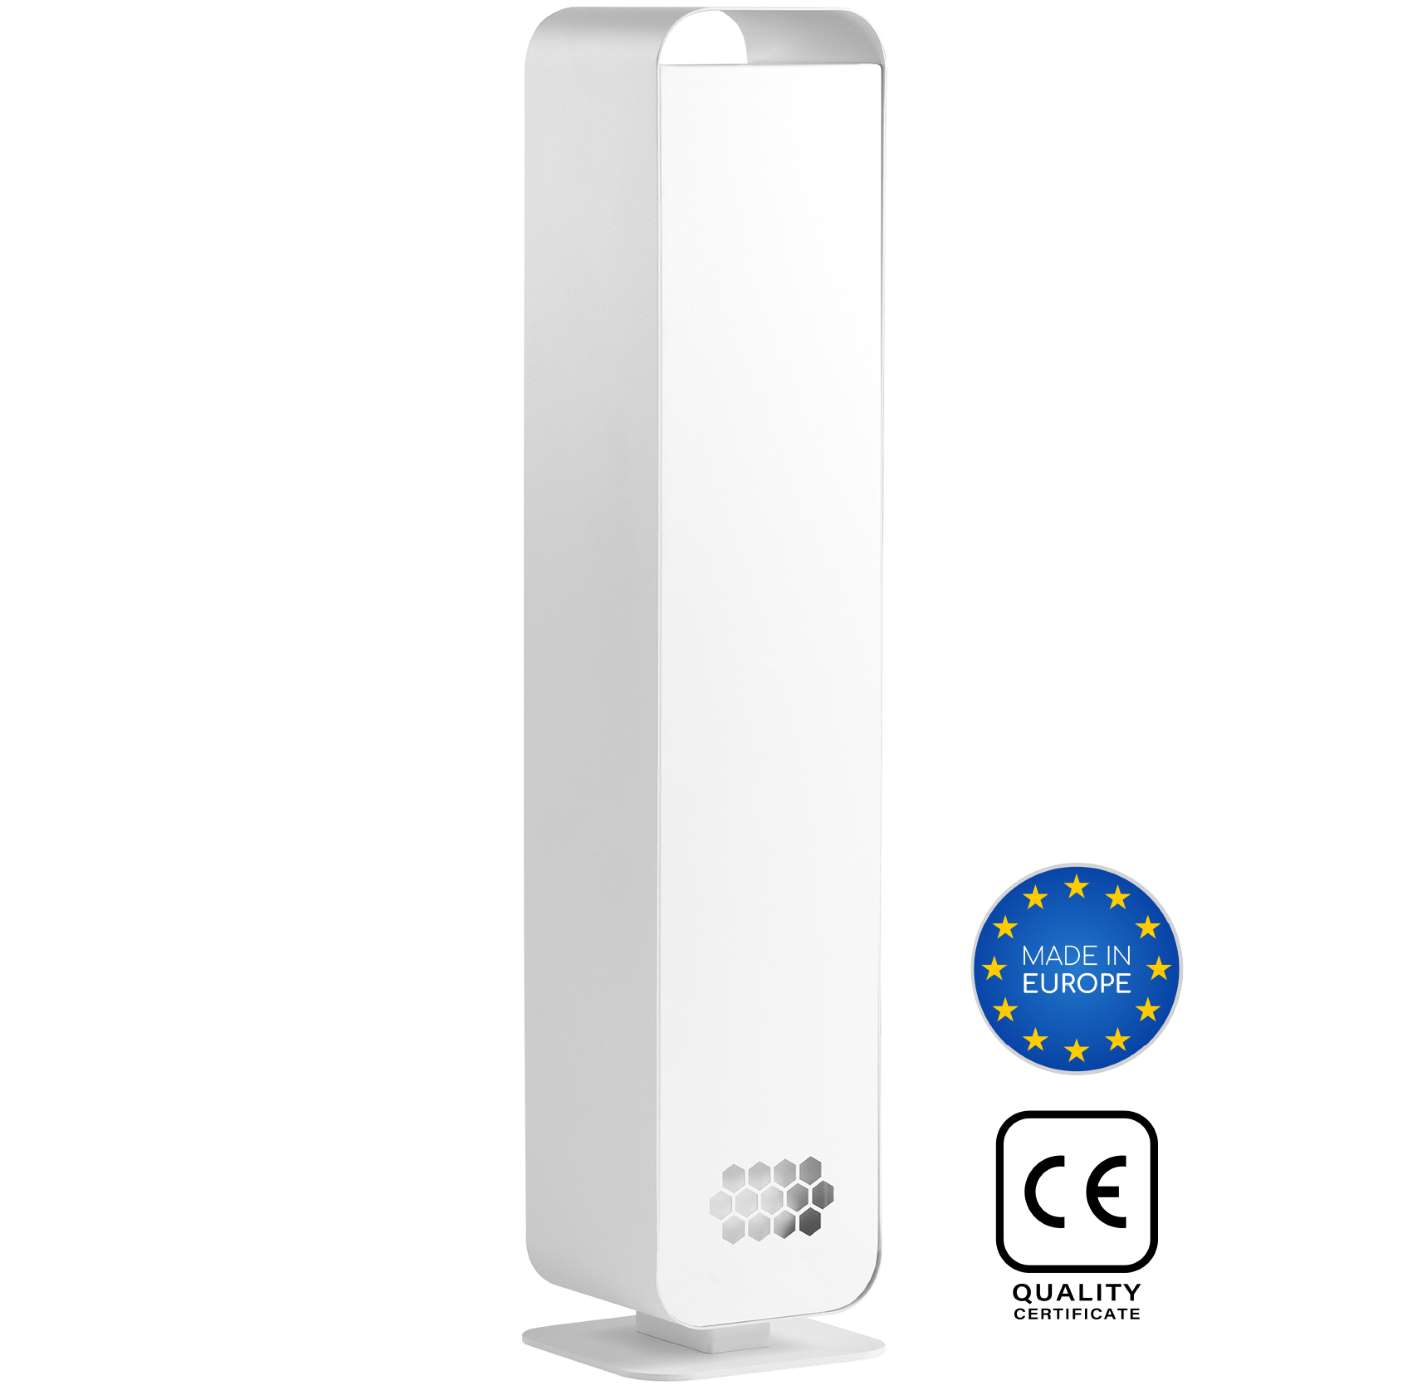 UV Air Purifiers for Schools and Offices in Carlisle, Cumbria